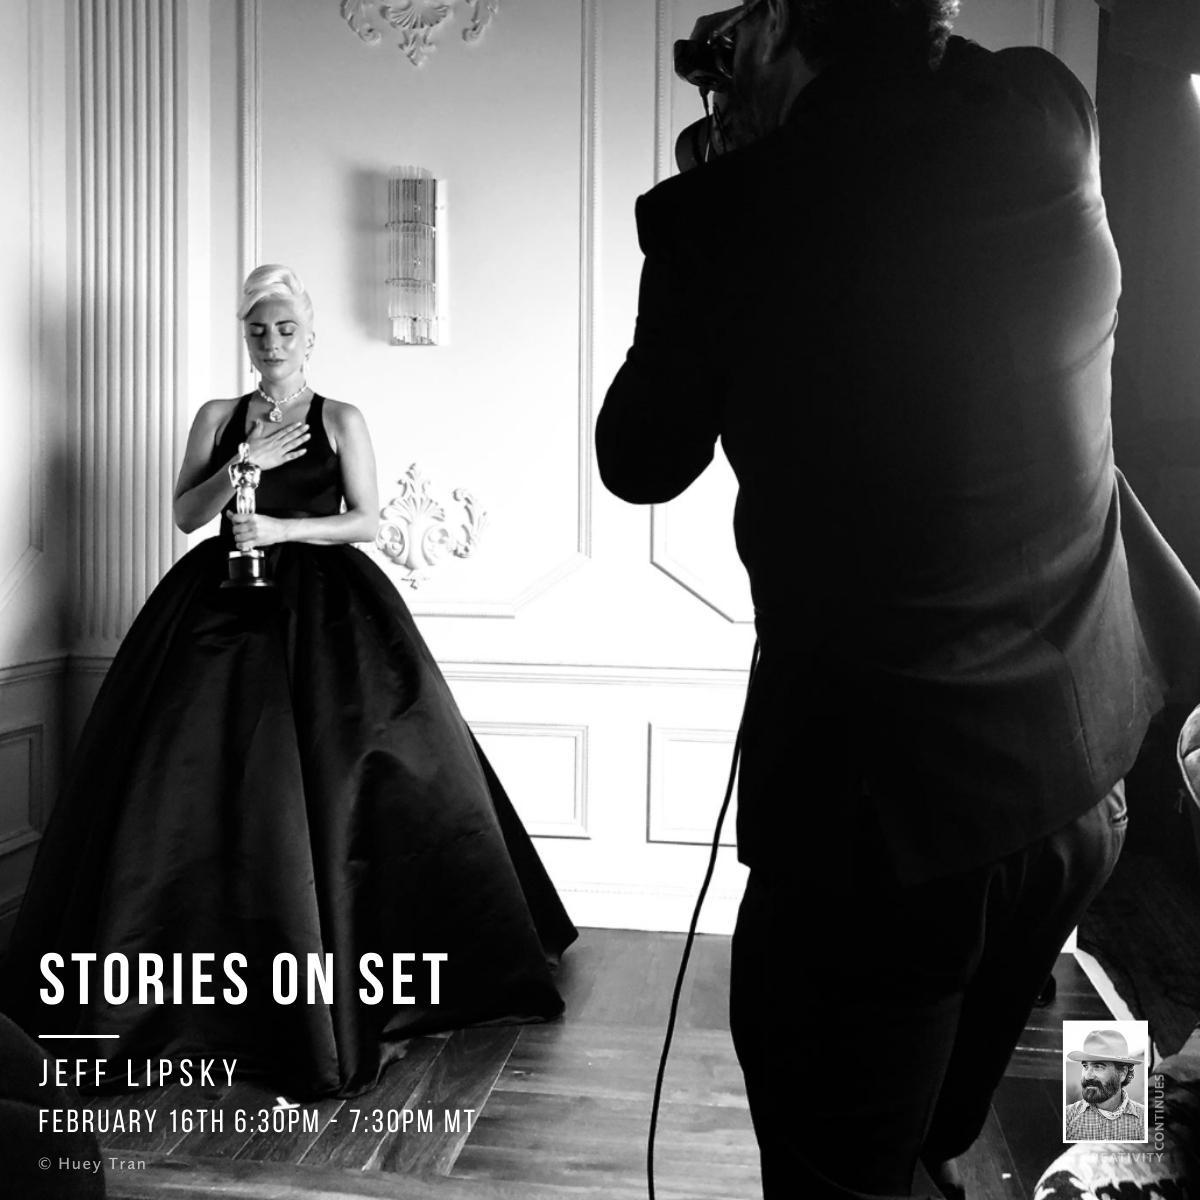 Santa Fe Workshops Creativity Continues Stories on Set with Jeff Lipsky